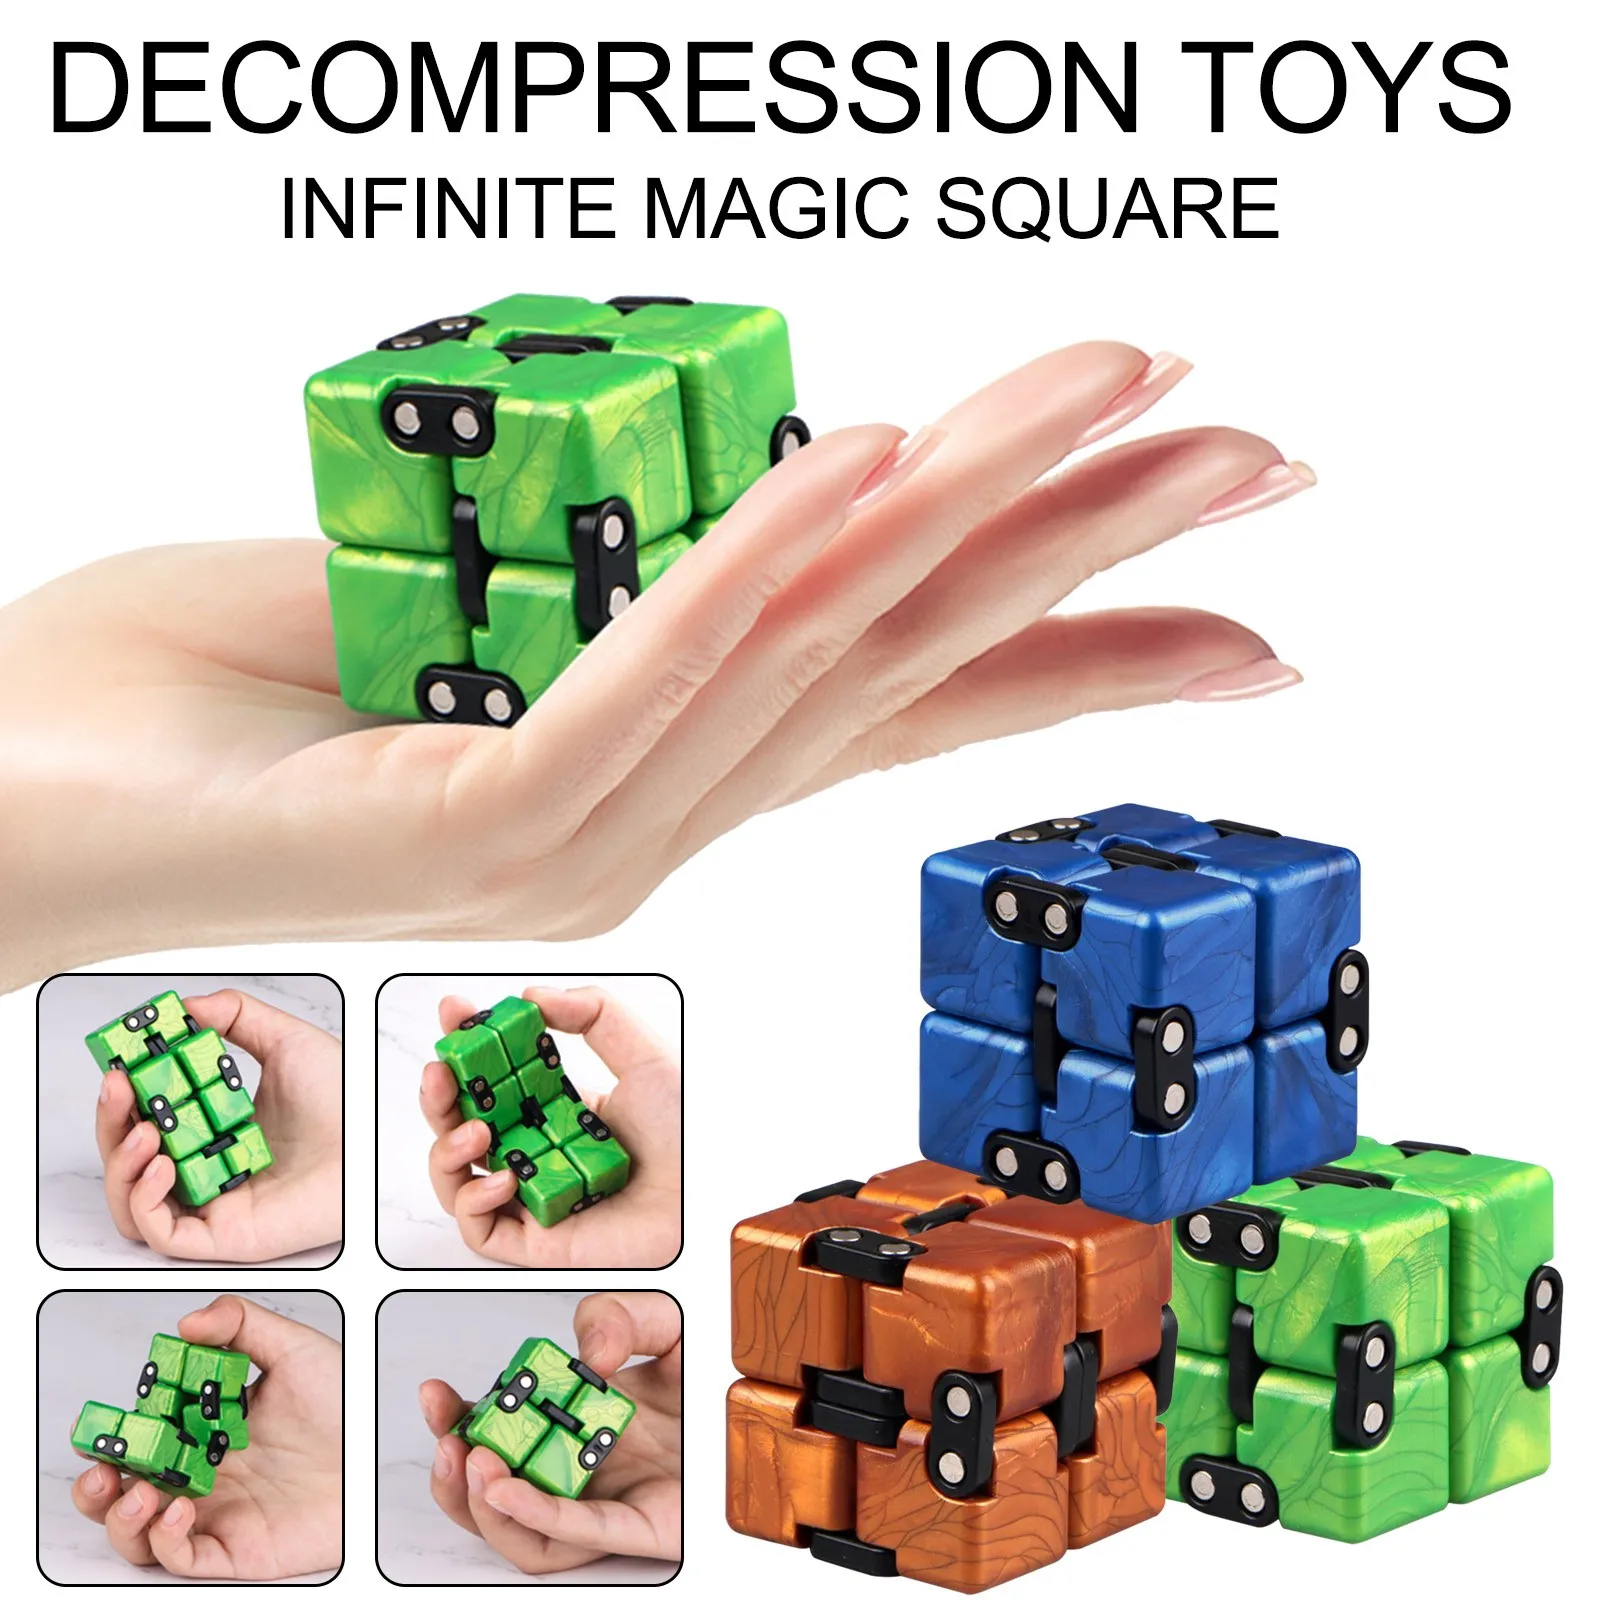 

Fidget toys Reliver Stress Fingertips Decompress Portable Lightweight Magic Square Antistress Toys Infinity Cube Sensory Toys